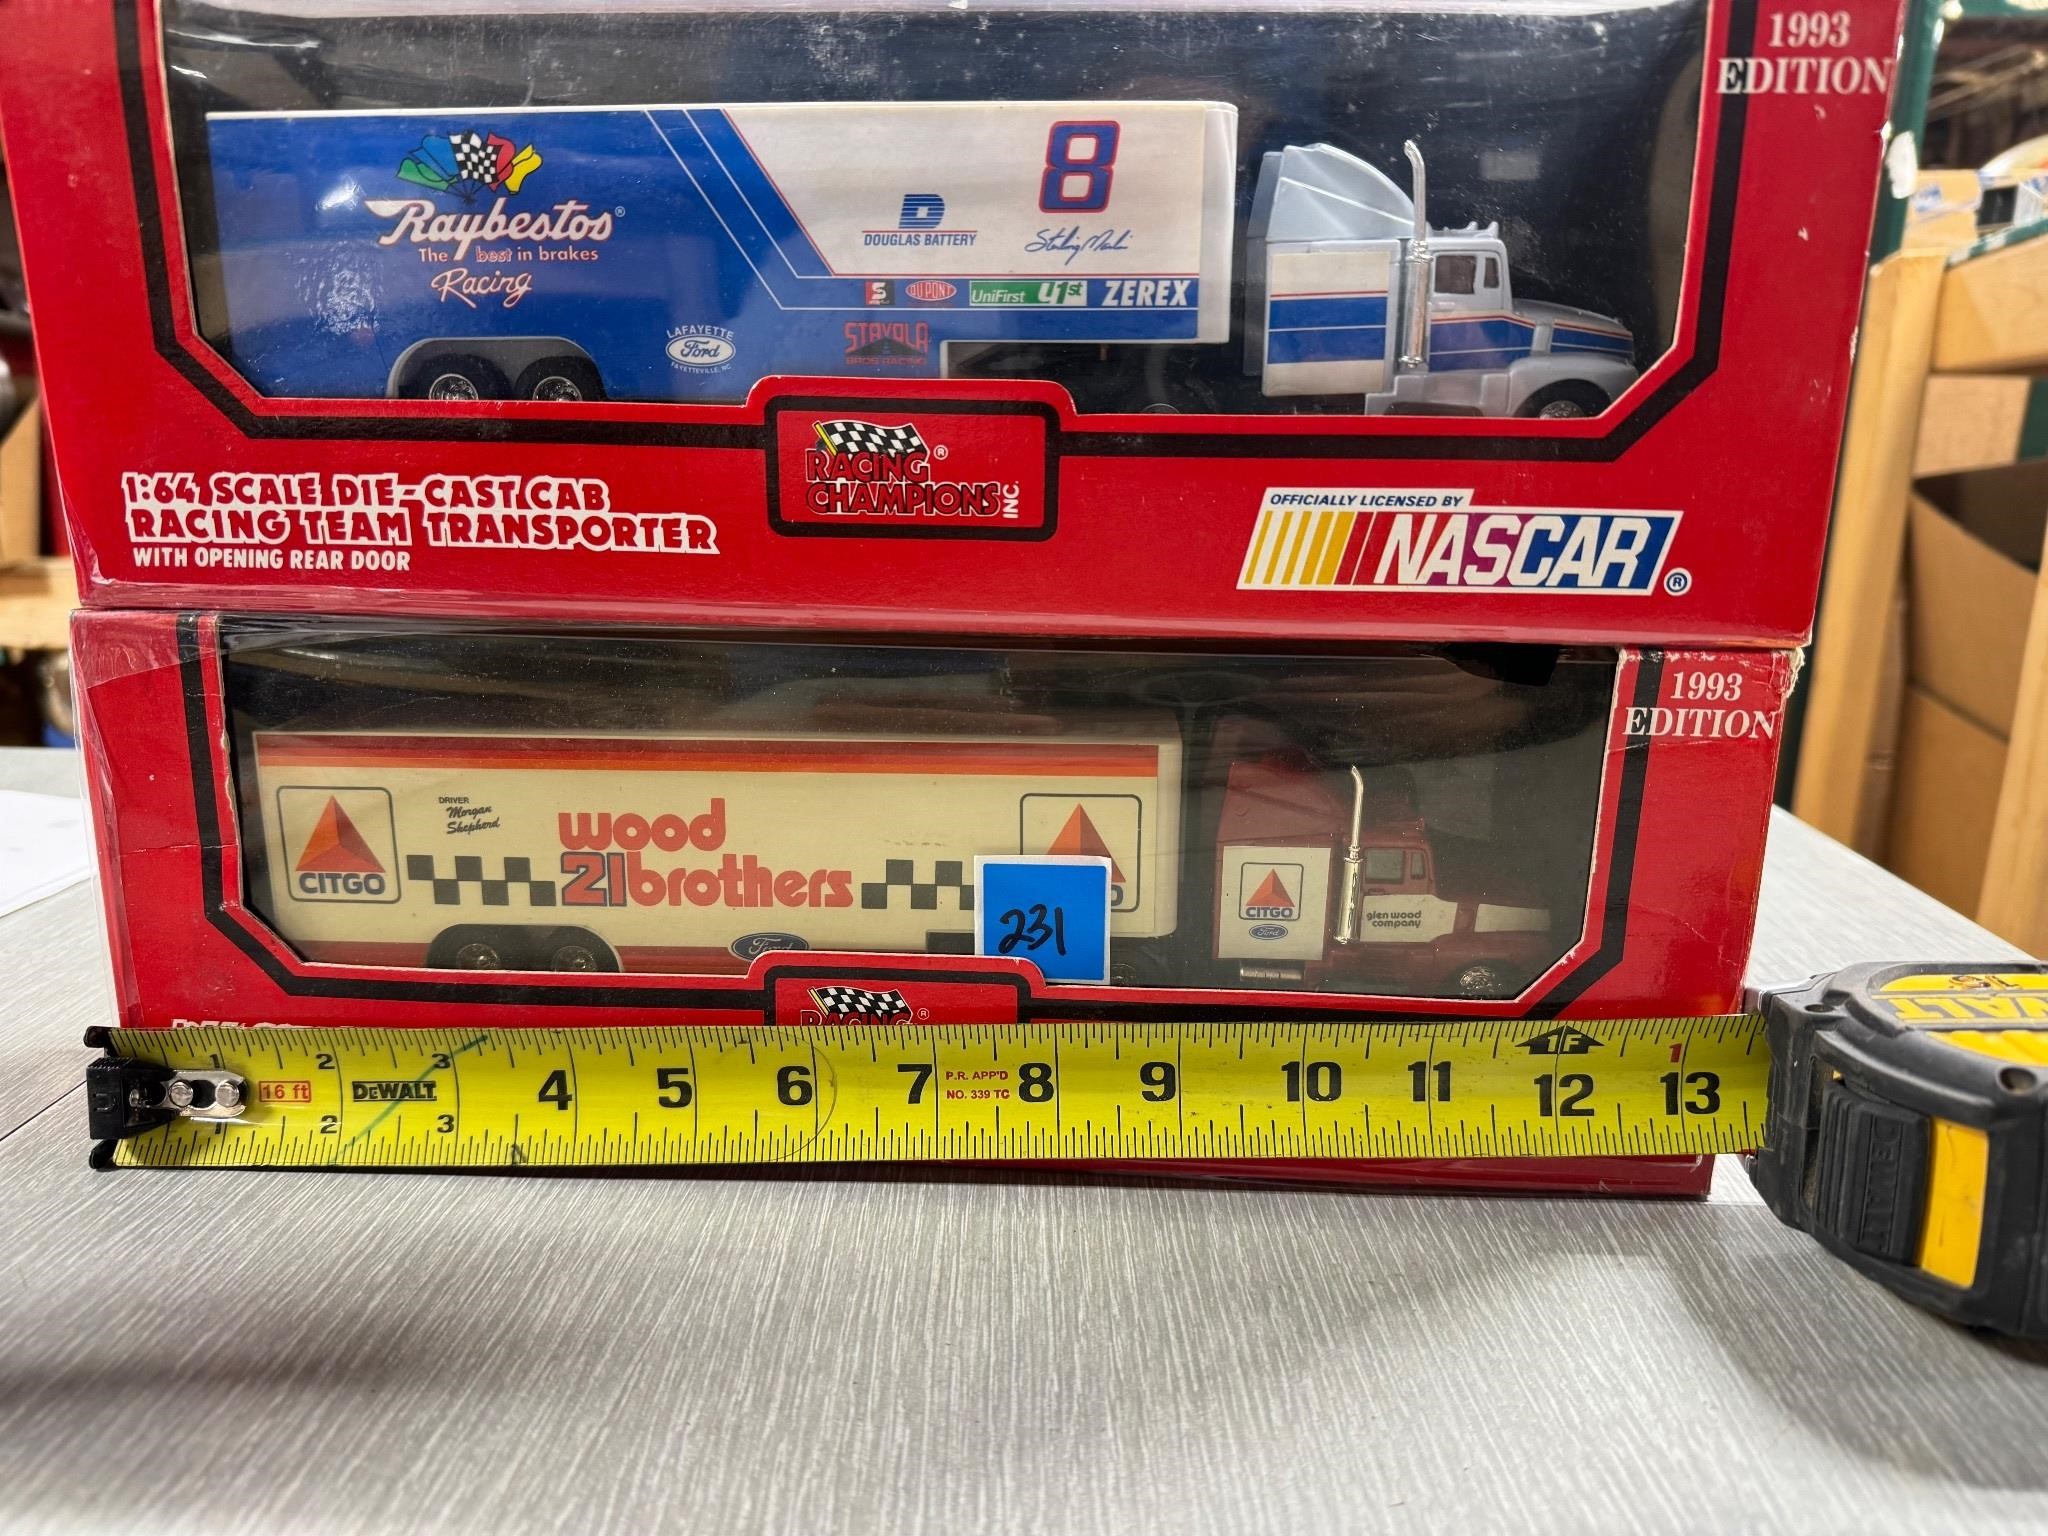 Trains, Accessories, toys, diecast, and tools